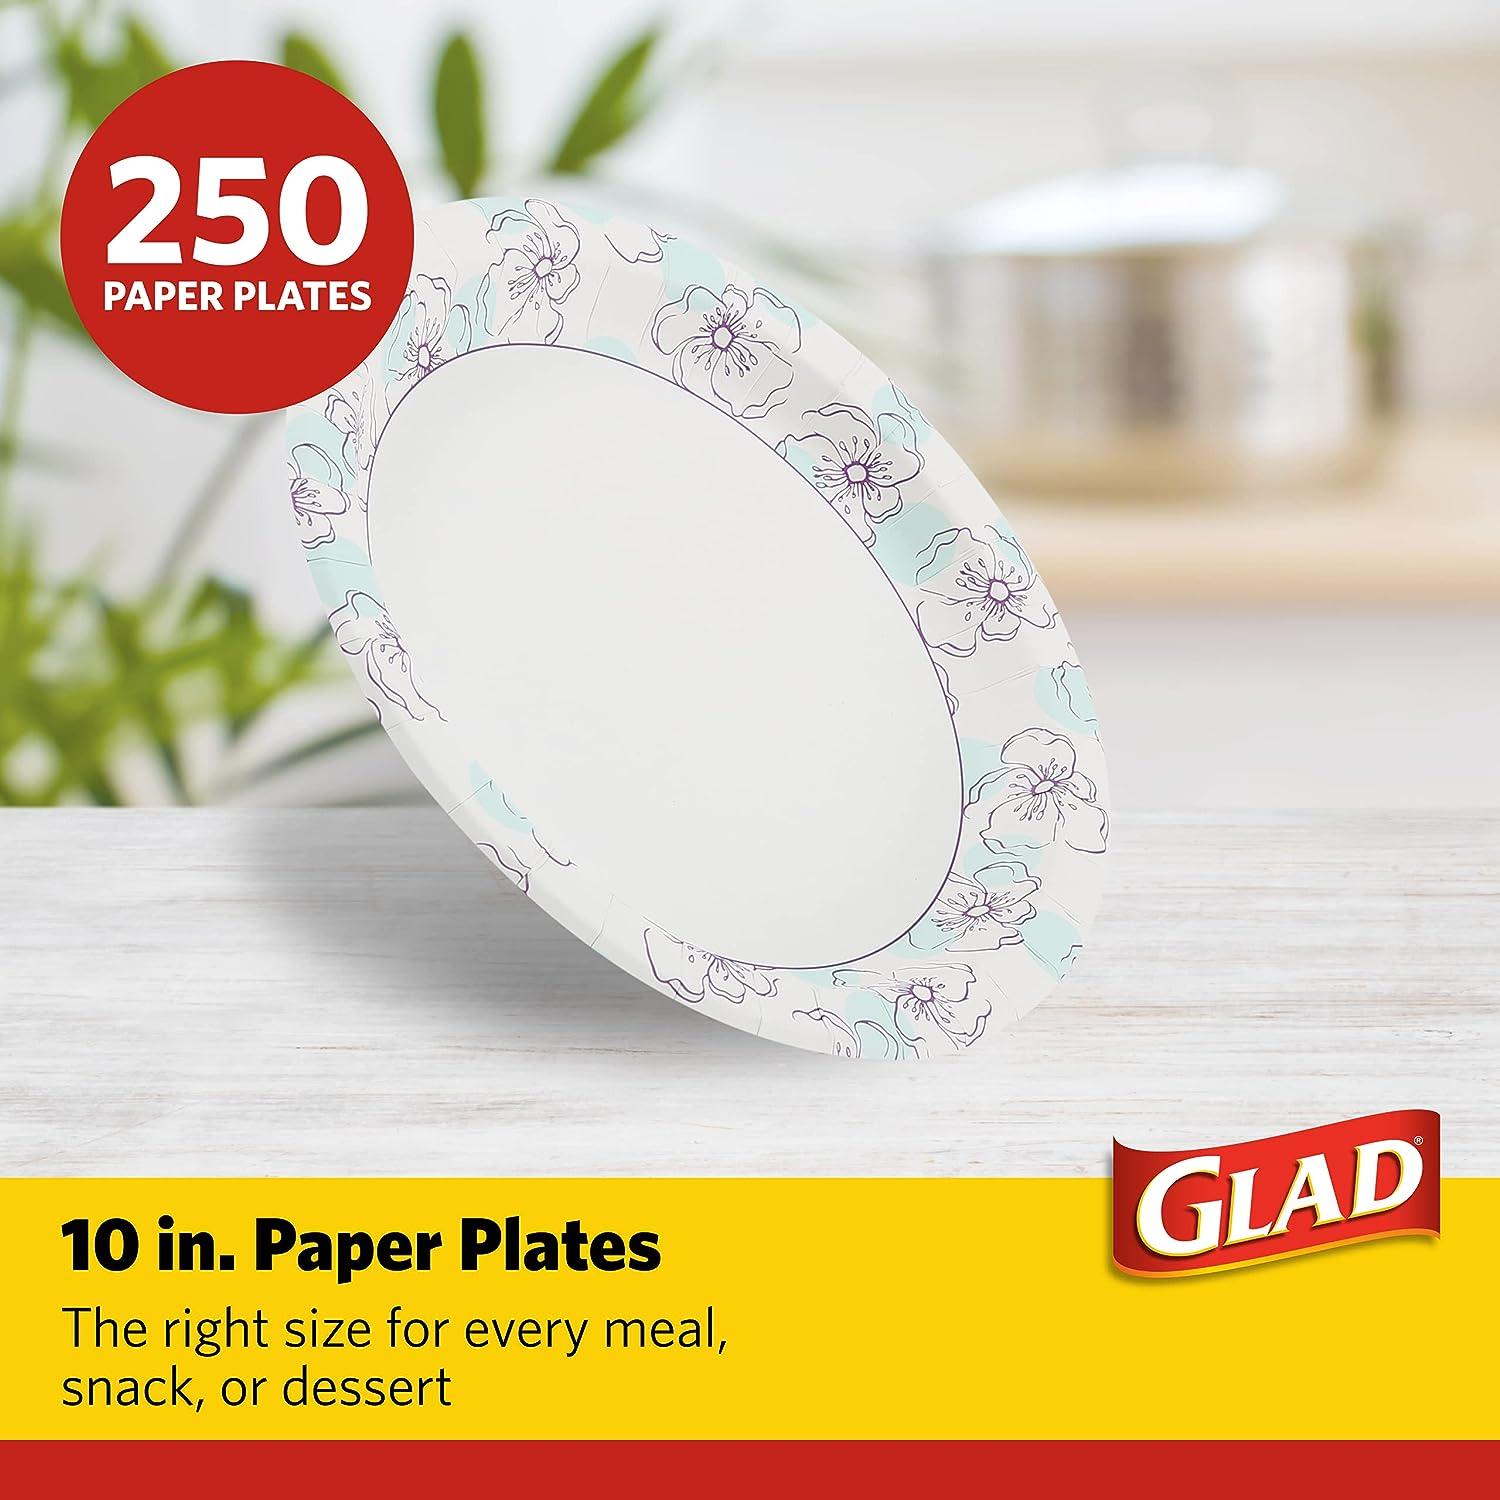 Glad Round Disposable Paper Plates for All Occasions